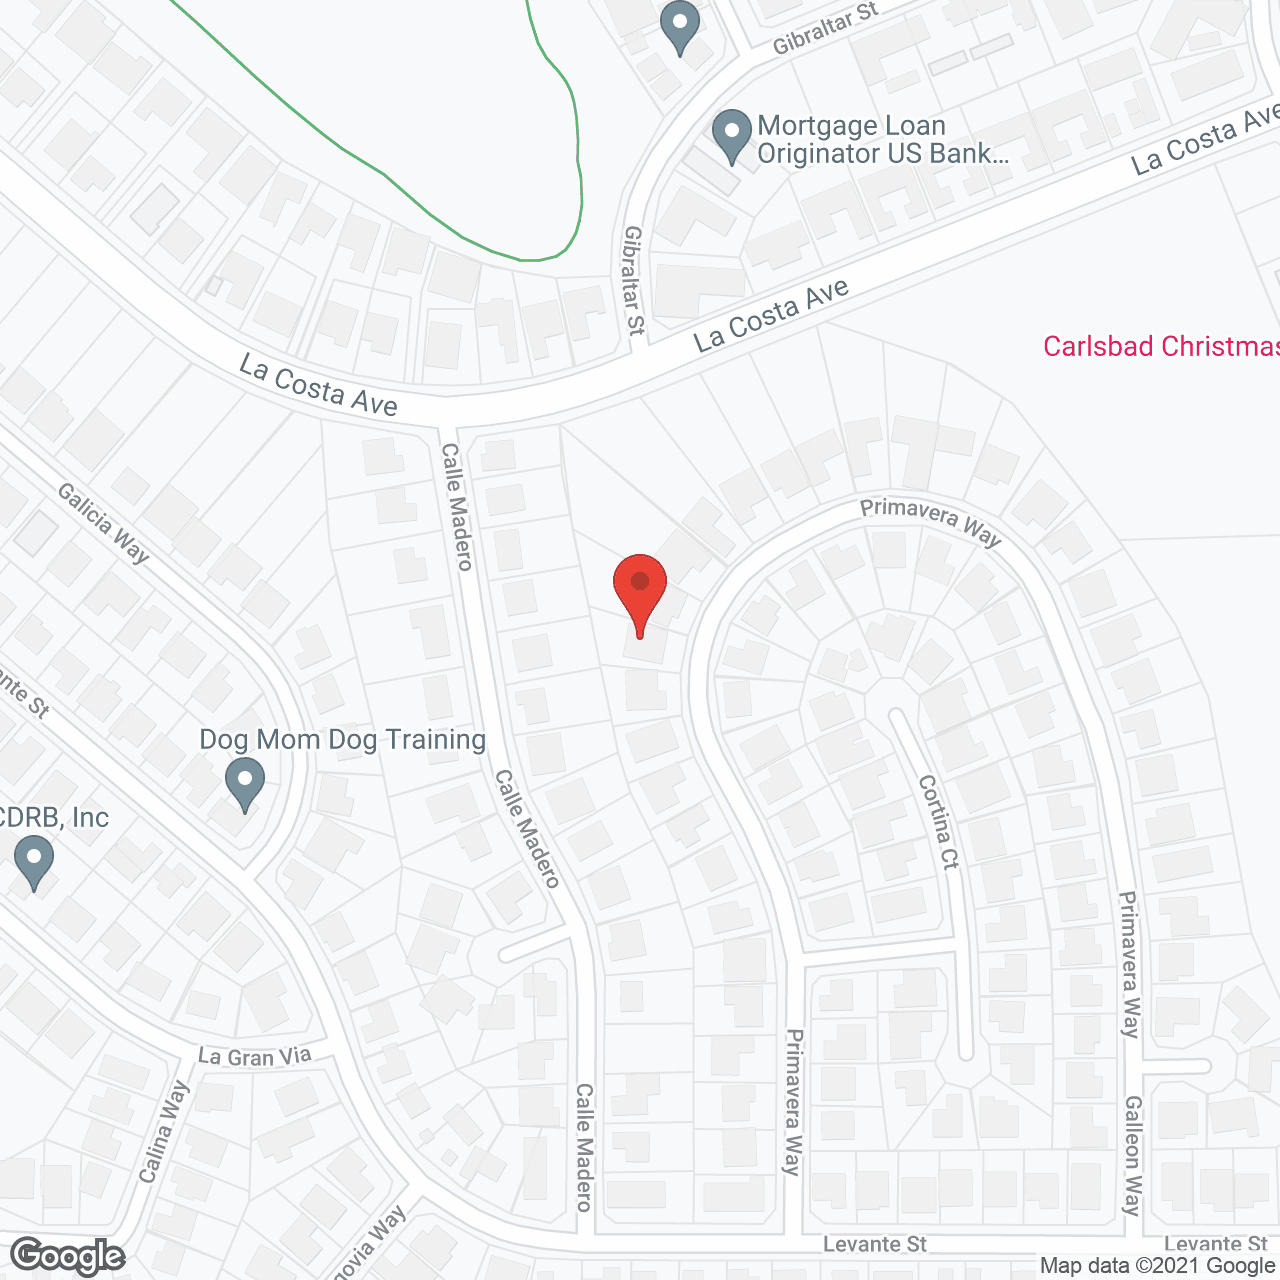 North La Costa Assisted Living in google map